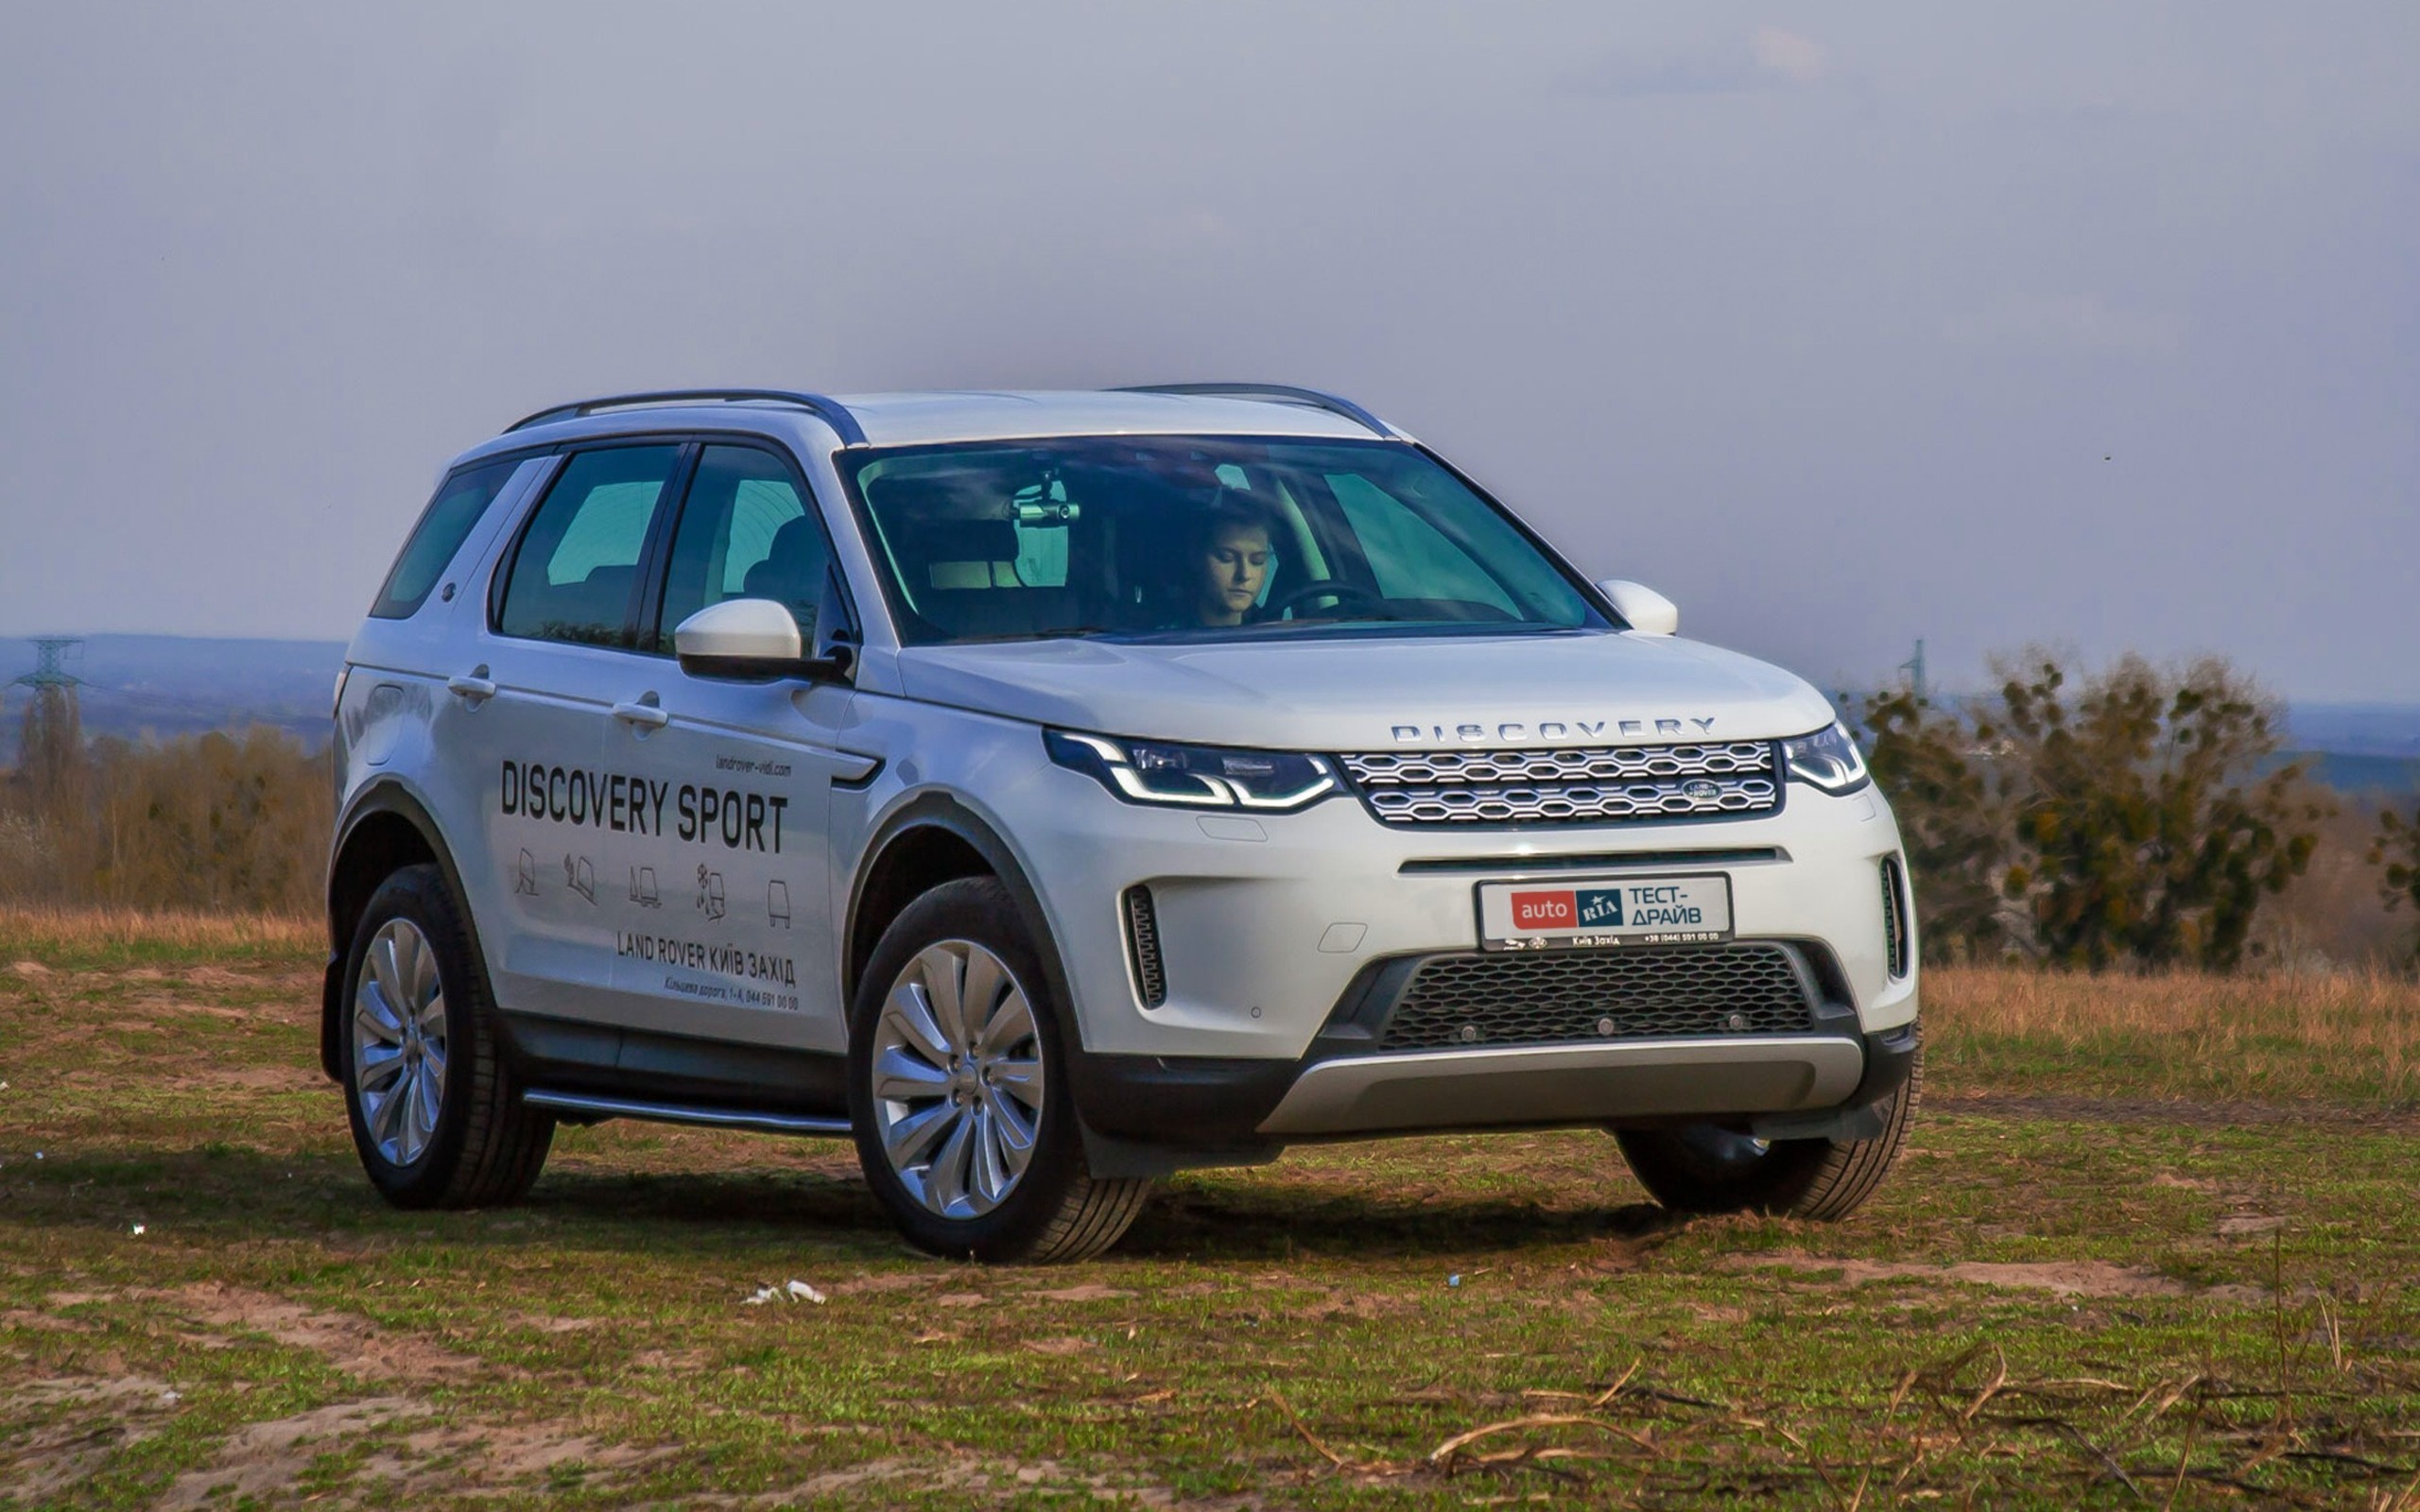 Land Rover Discovery Sport › Test drive